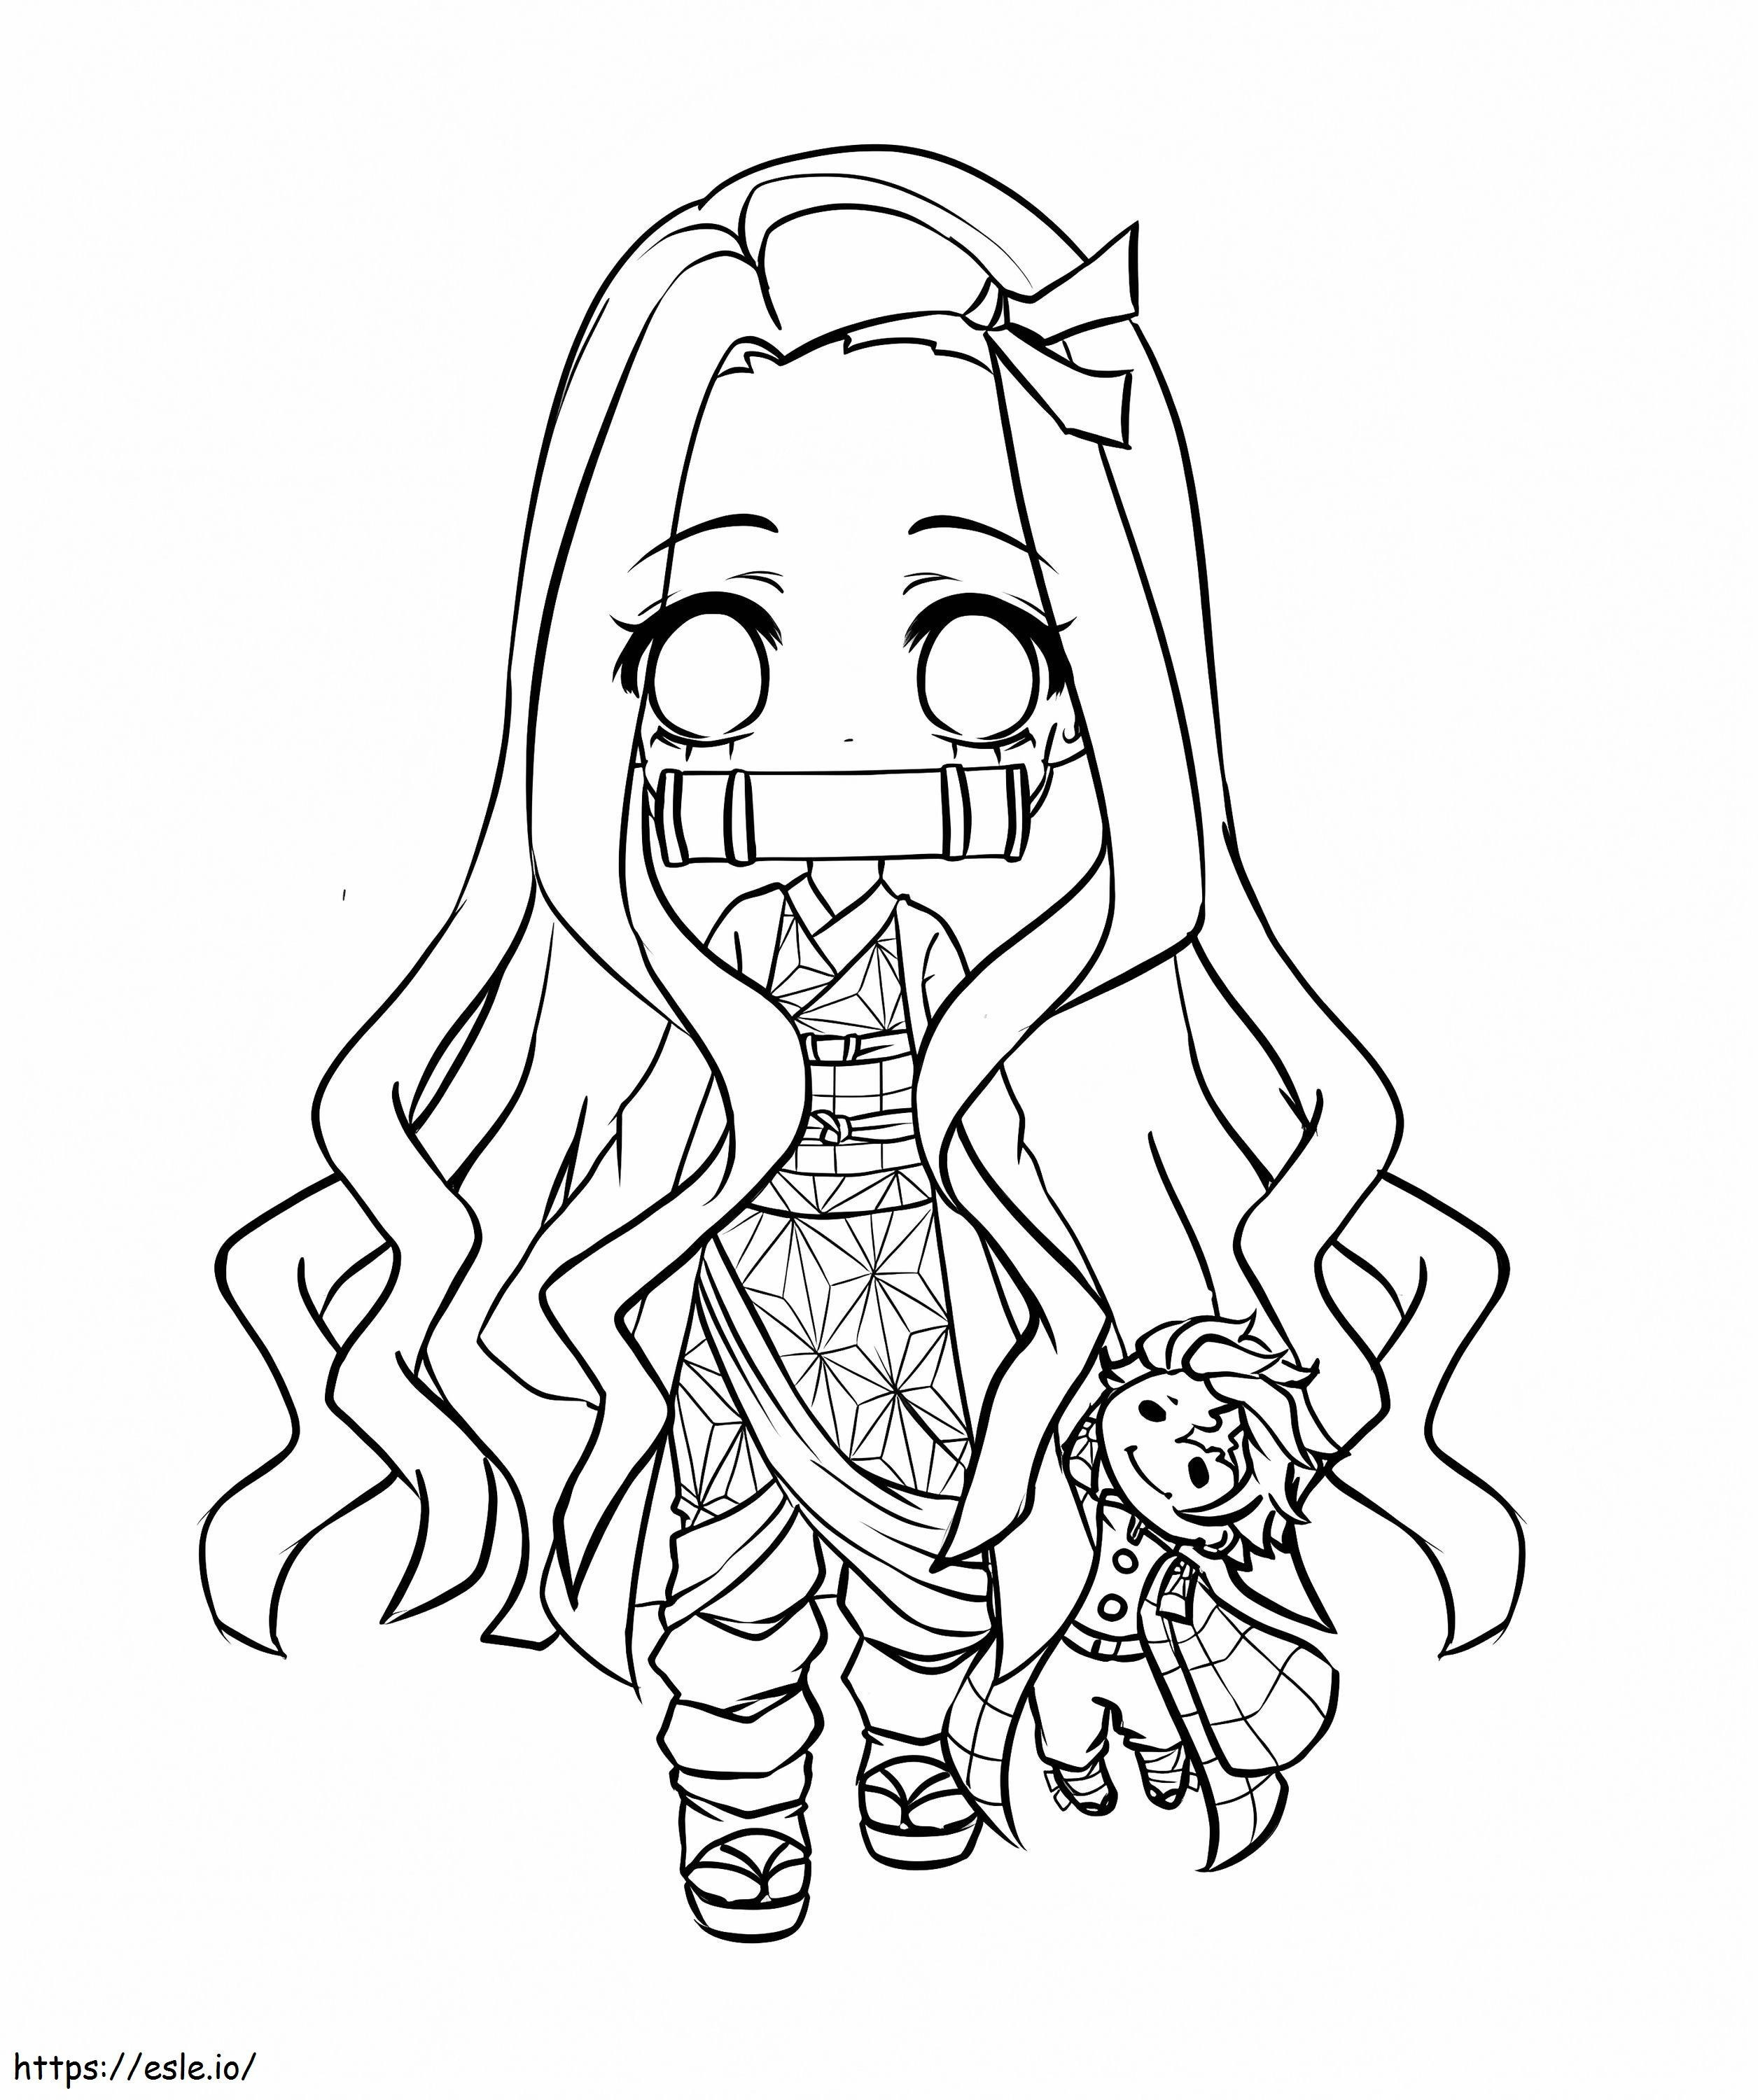 Lovely Nezuko coloring page